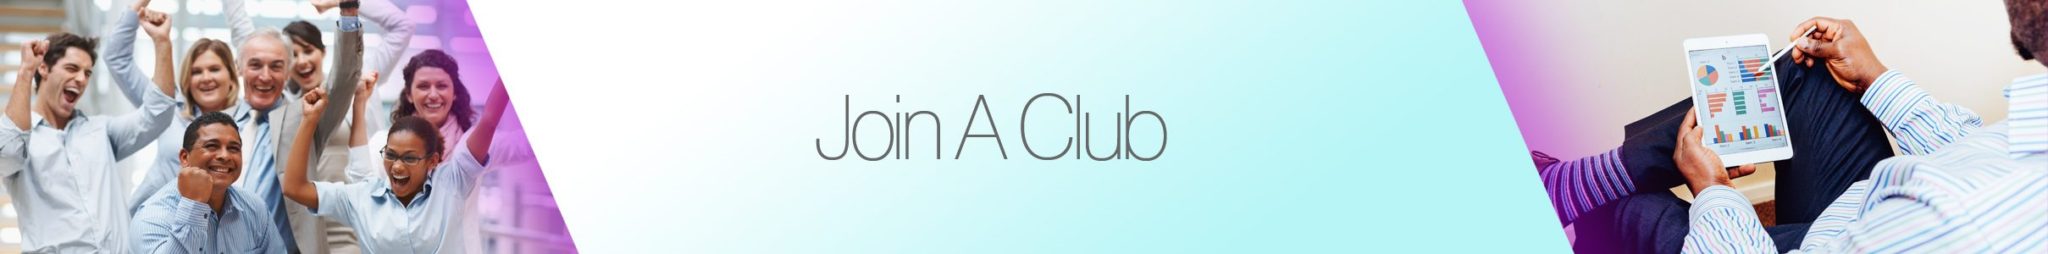 Join-the-Club-Banner